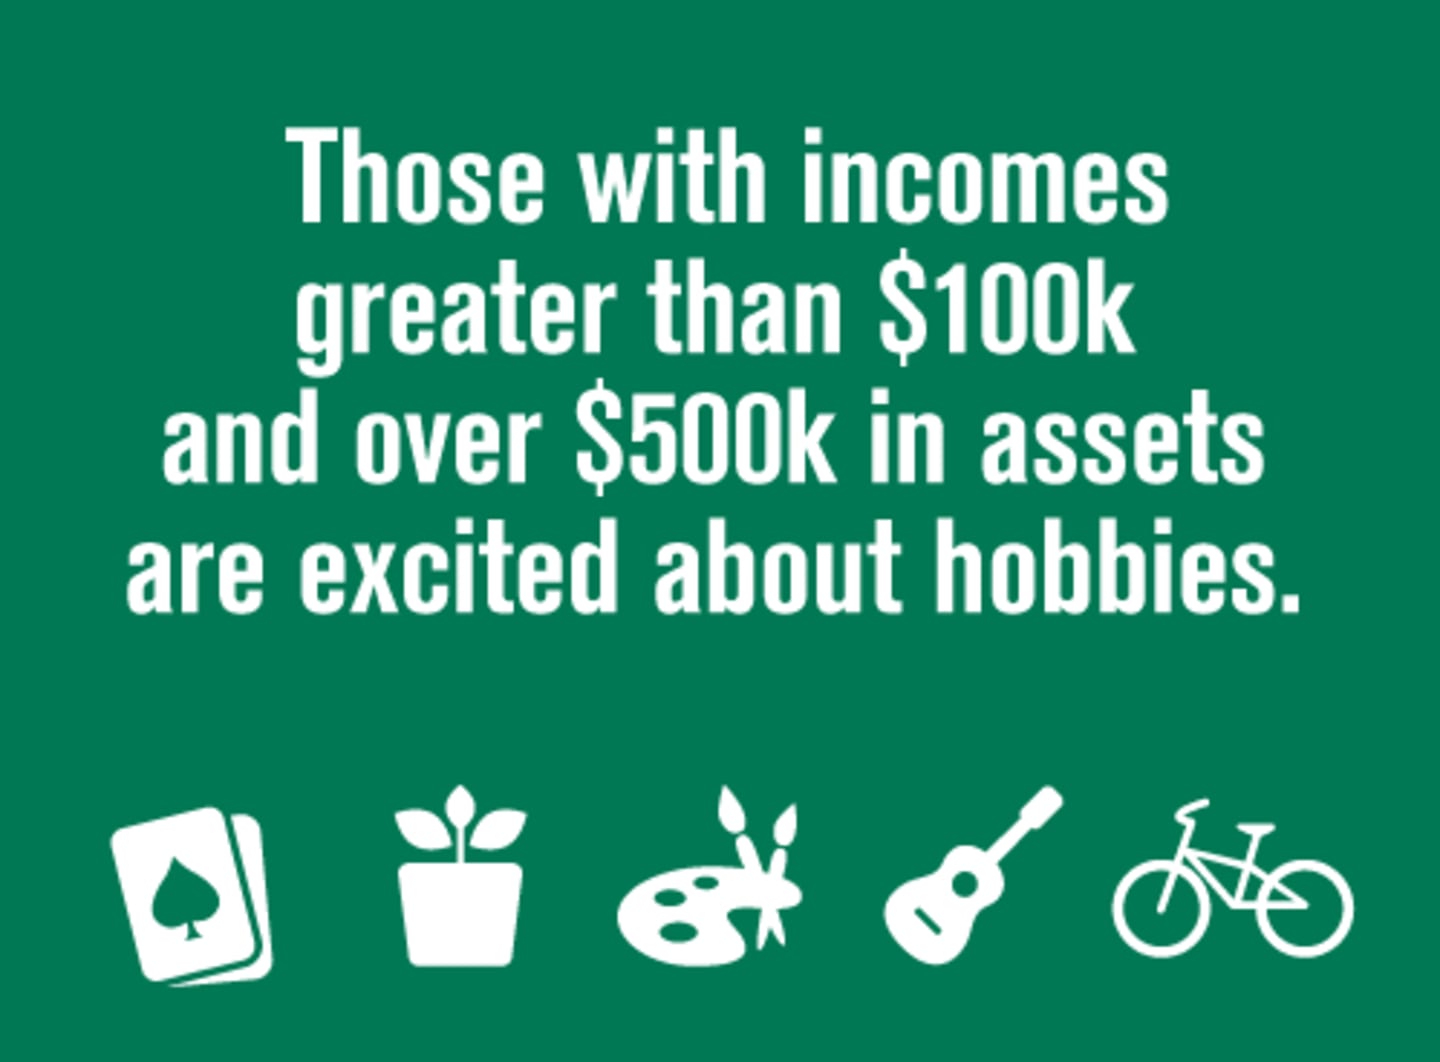 Those with incomes greater than $100k and assets over $500k are excited about hobbies.